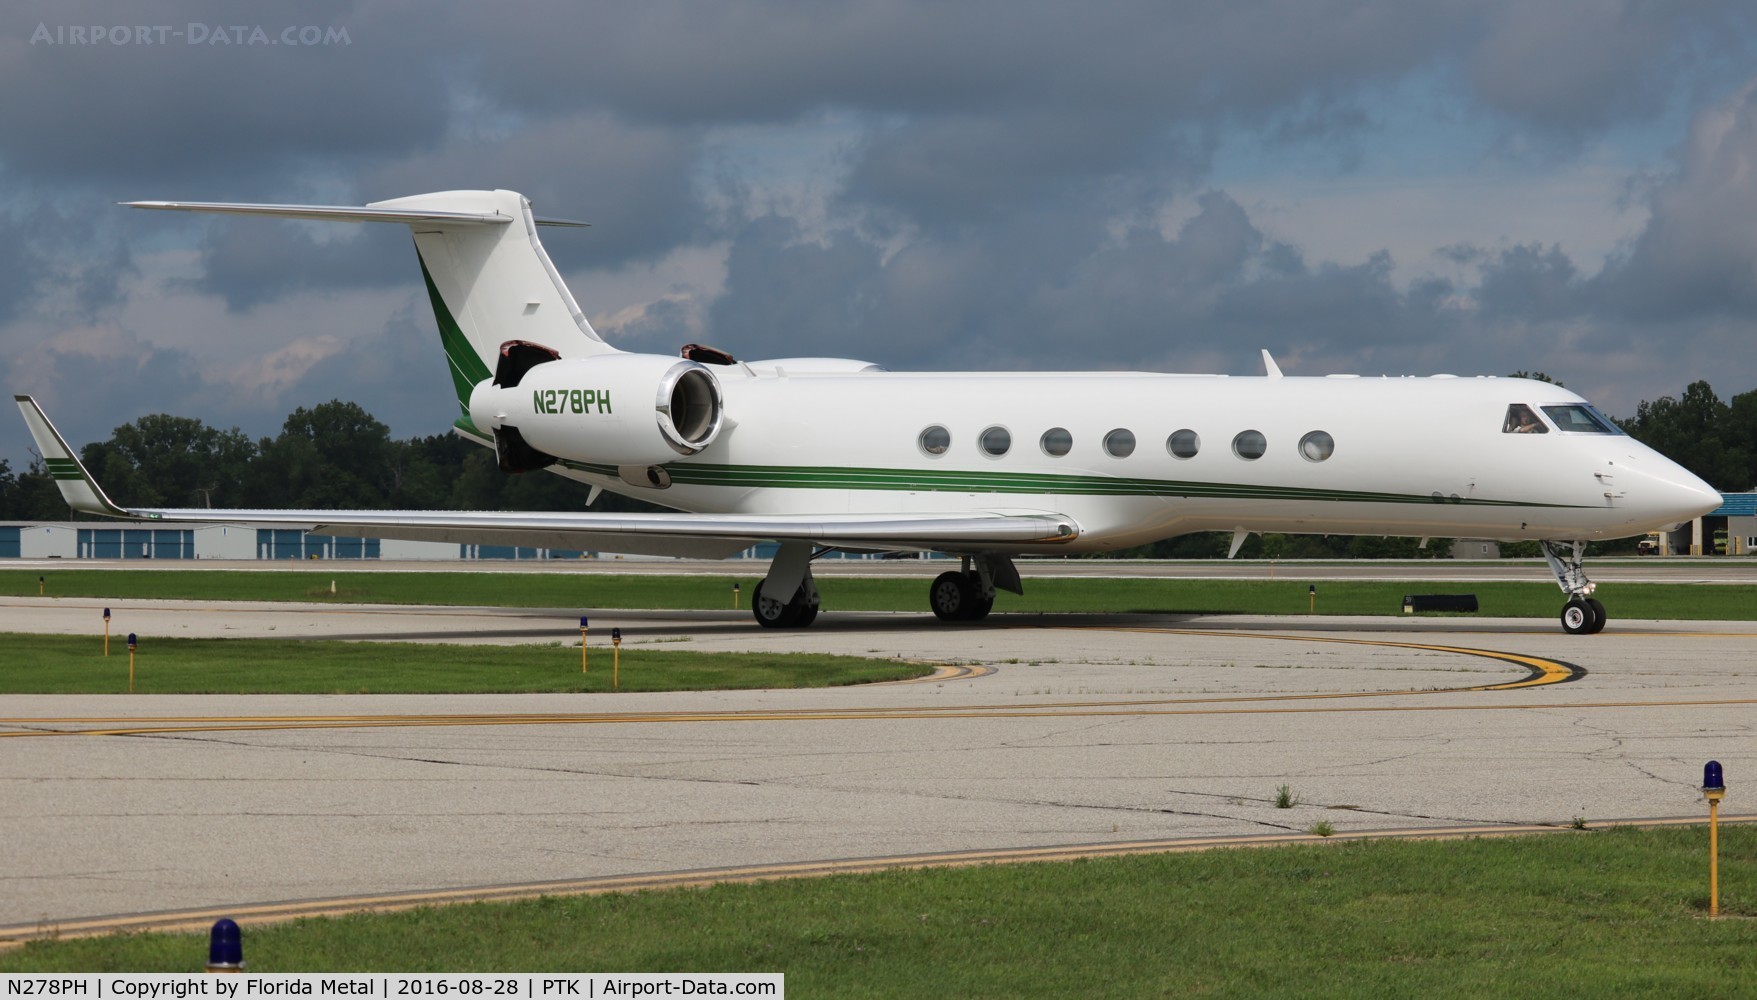 N278PH, 2001 Gulfstream Aerospace G-V C/N 640, Gulfstream V, one of the rare versions with 7 windows on one side and 6 on the other